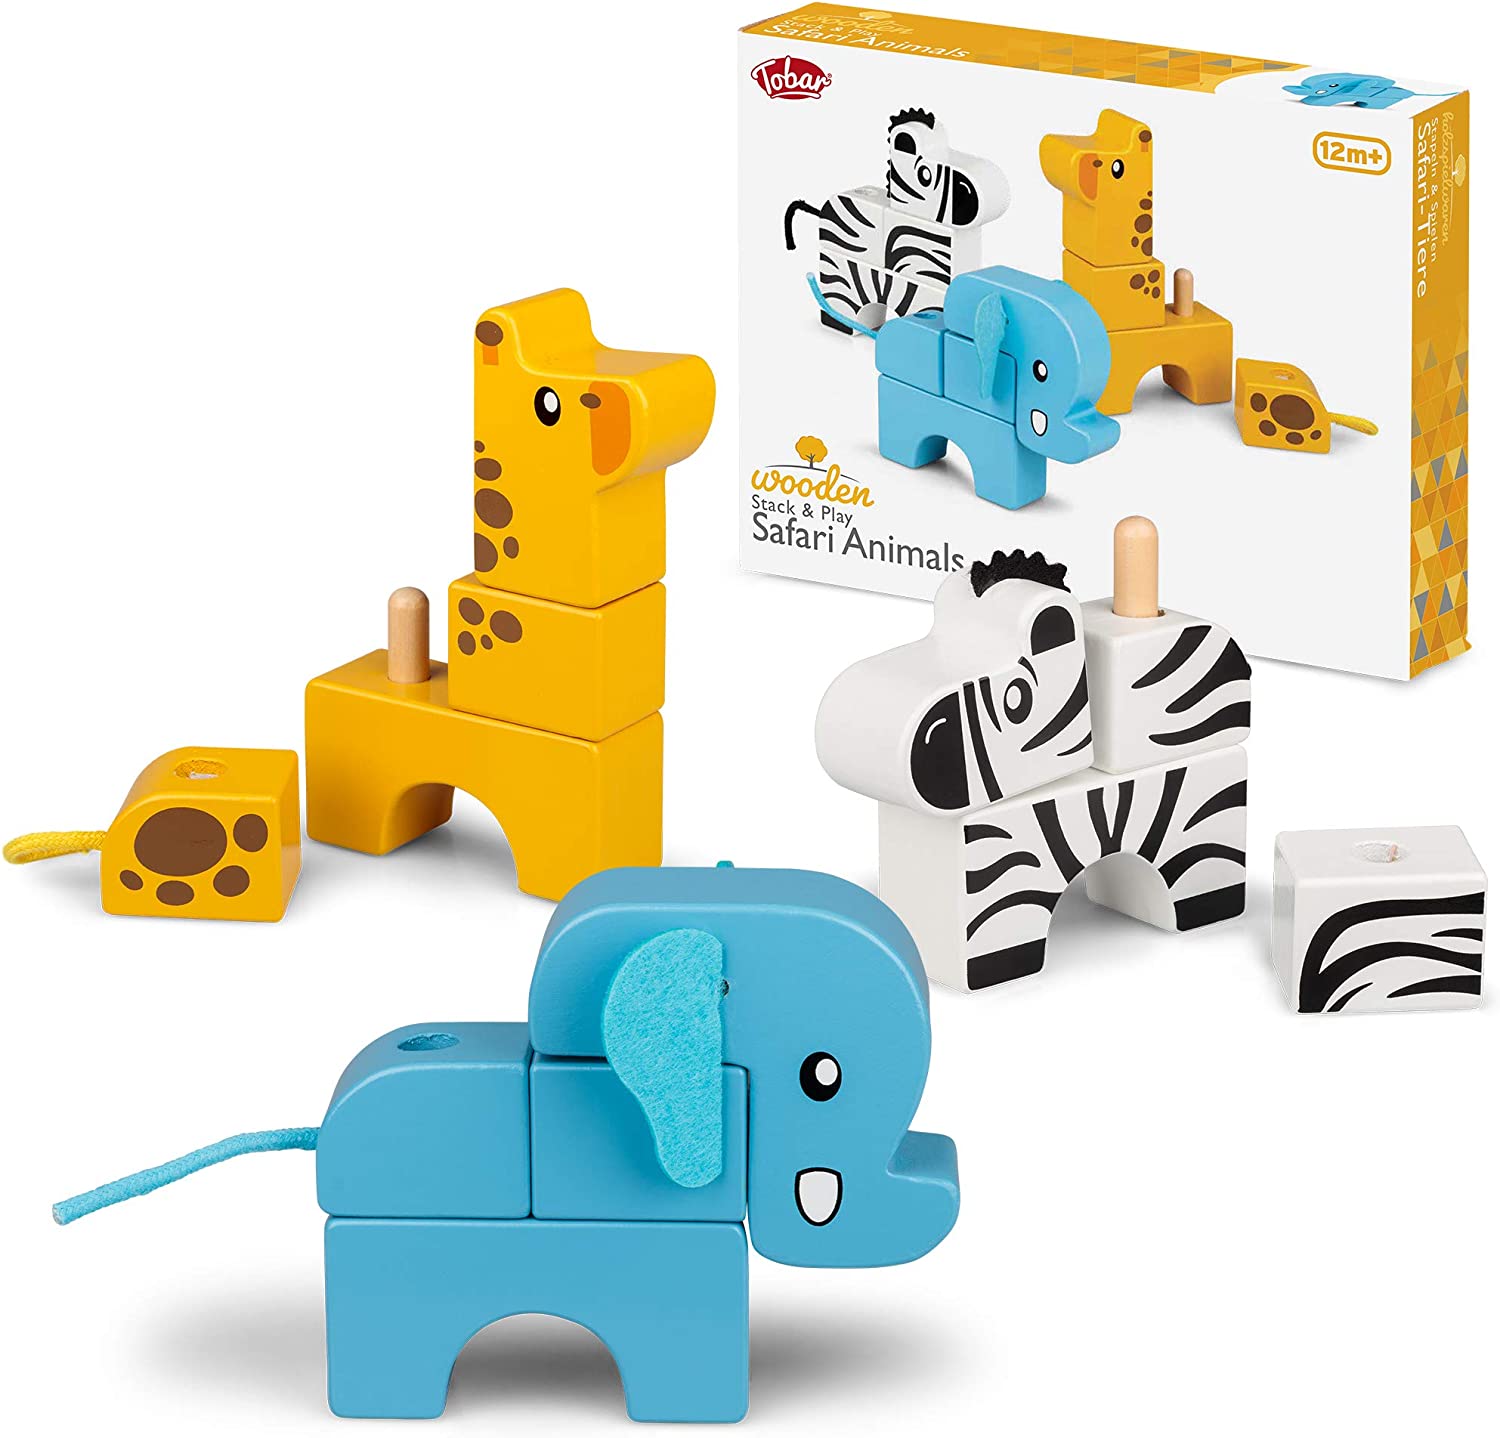 Wooden Stack and Play Safari Animals FX7407